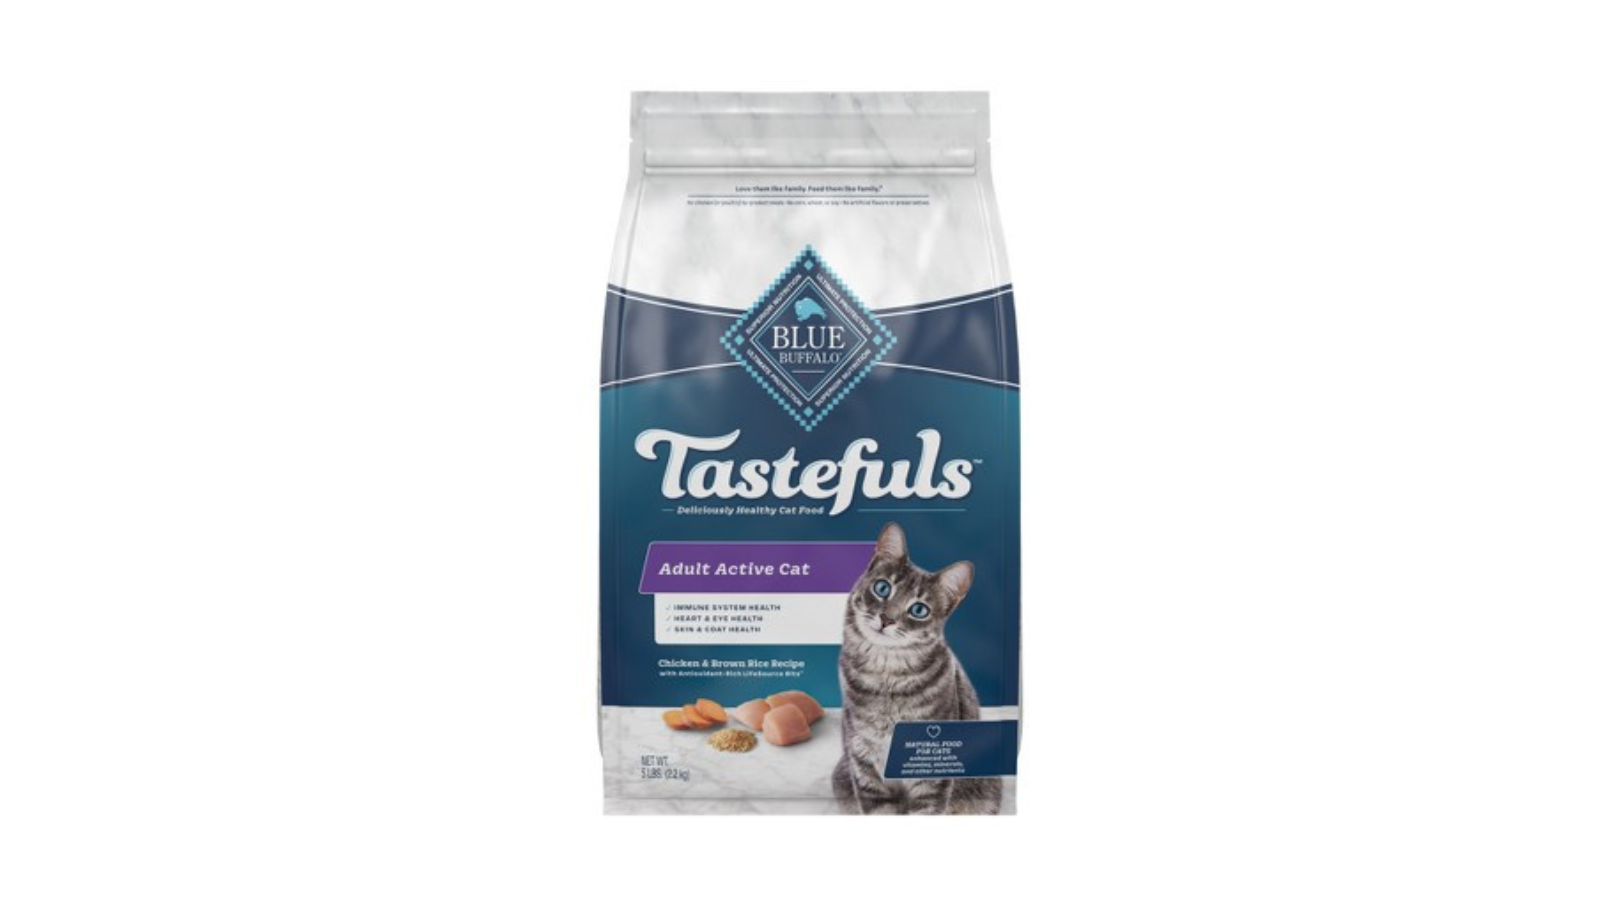 A bowl of high-quality dry cat food designed specifically for indoor cats, featuring a mix of kibble in various shapes and sizes. The food is rich in protein, fibers, and essential nutrients, promoting digestive health, weight control, and hairball management.